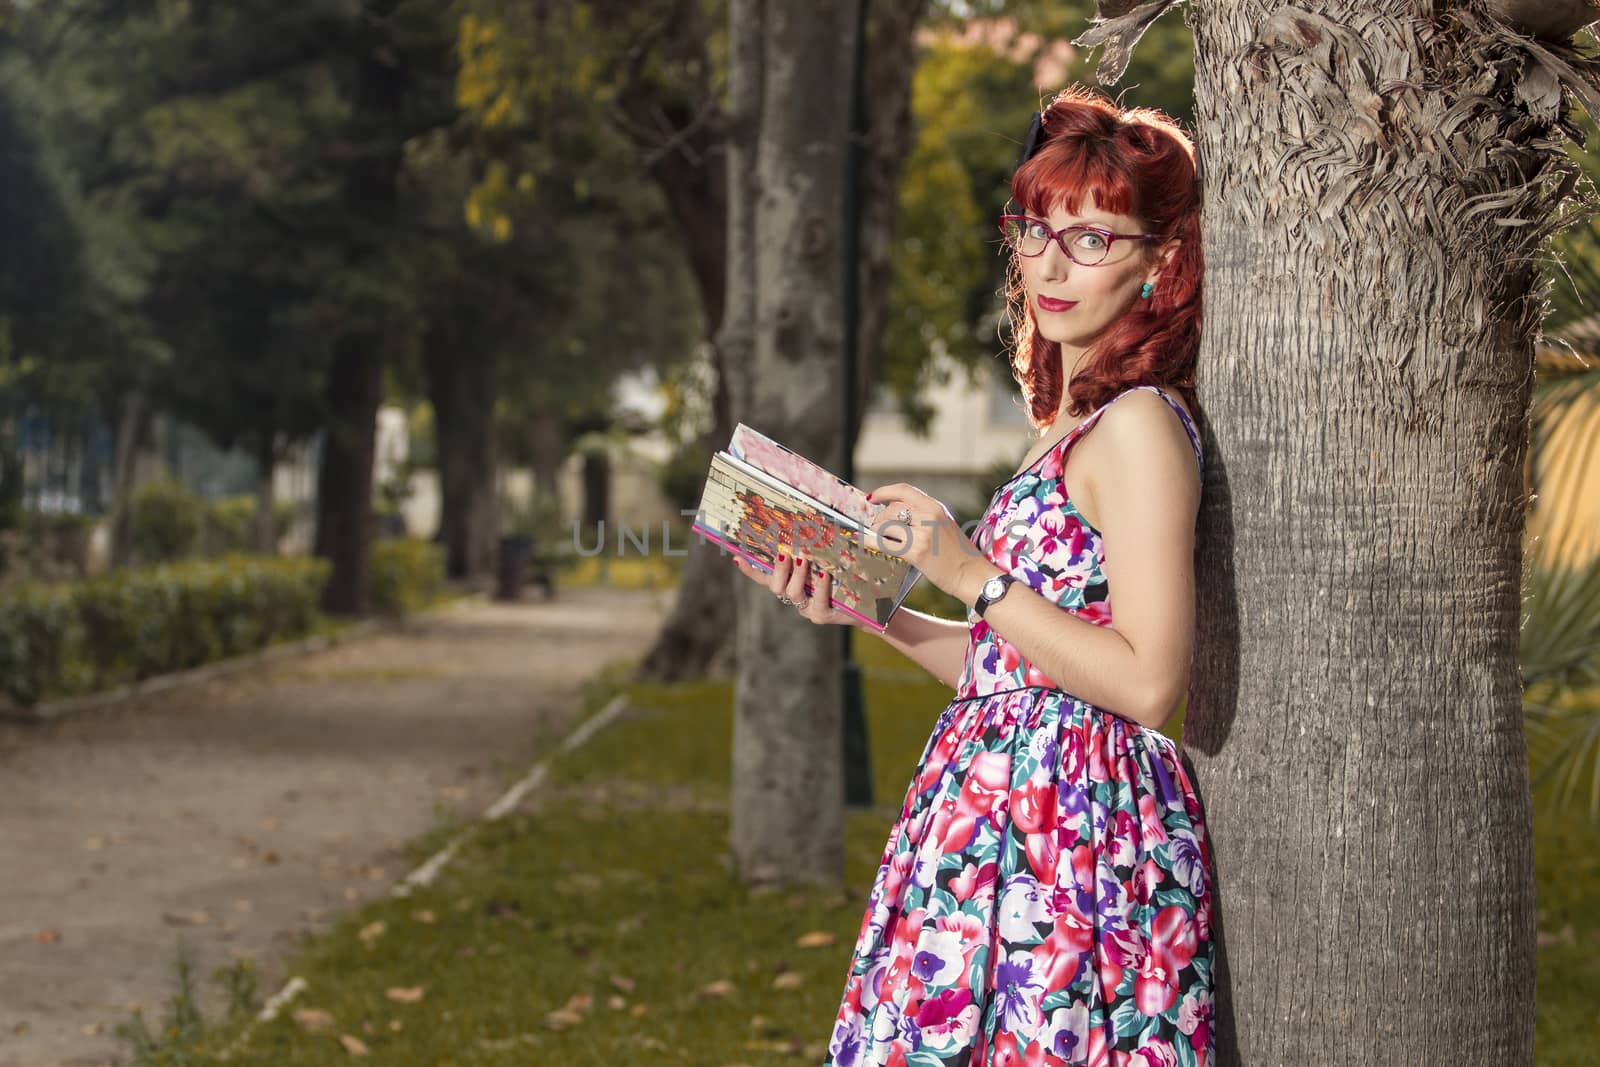 View of pinup young woman in vintage style clothing reading a book.